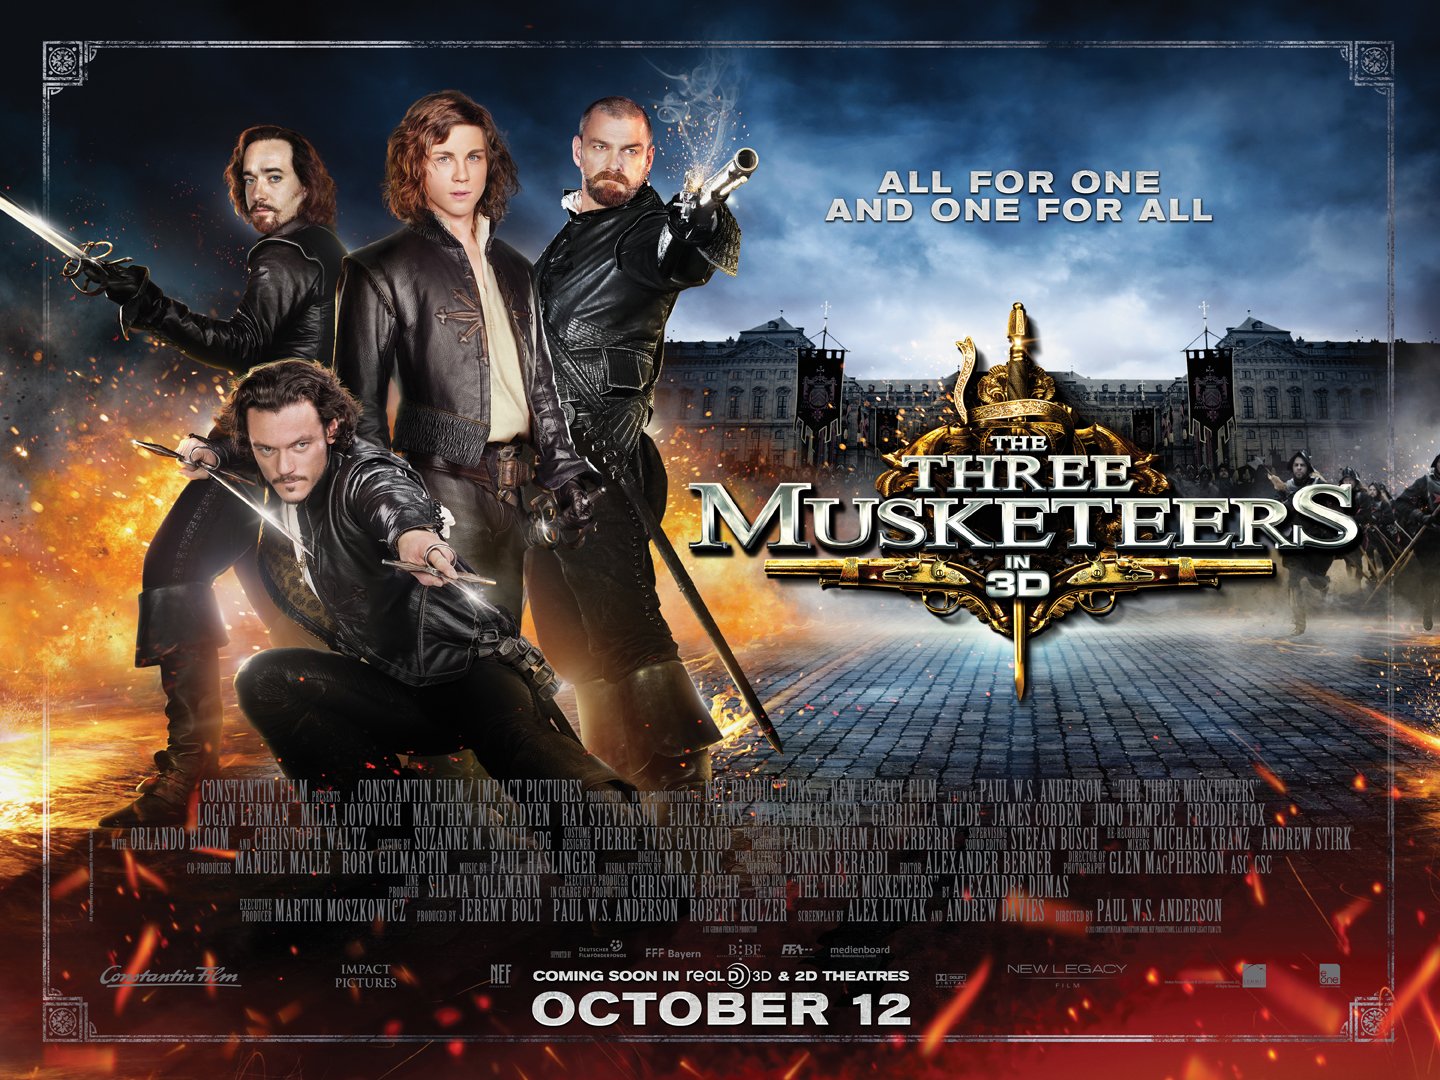 Extra Large Movie Poster Image for The Three Musketeers (#17 of 31)